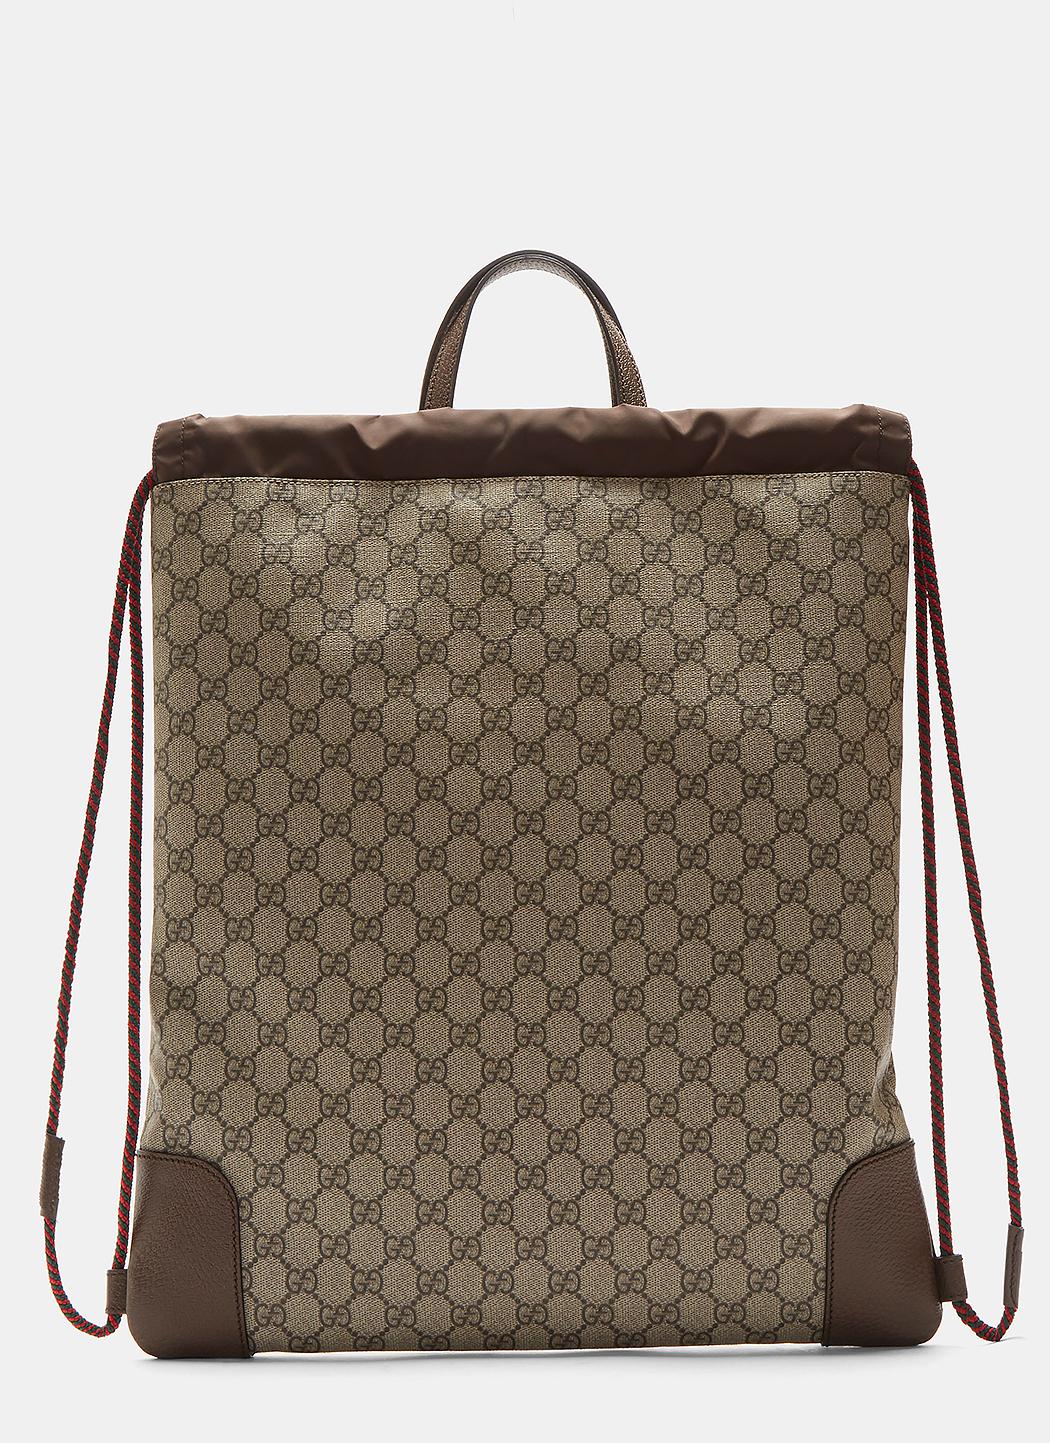 Gucci Courrier Soft Gg Supreme Drawstring Backpack. in Brown - Lyst